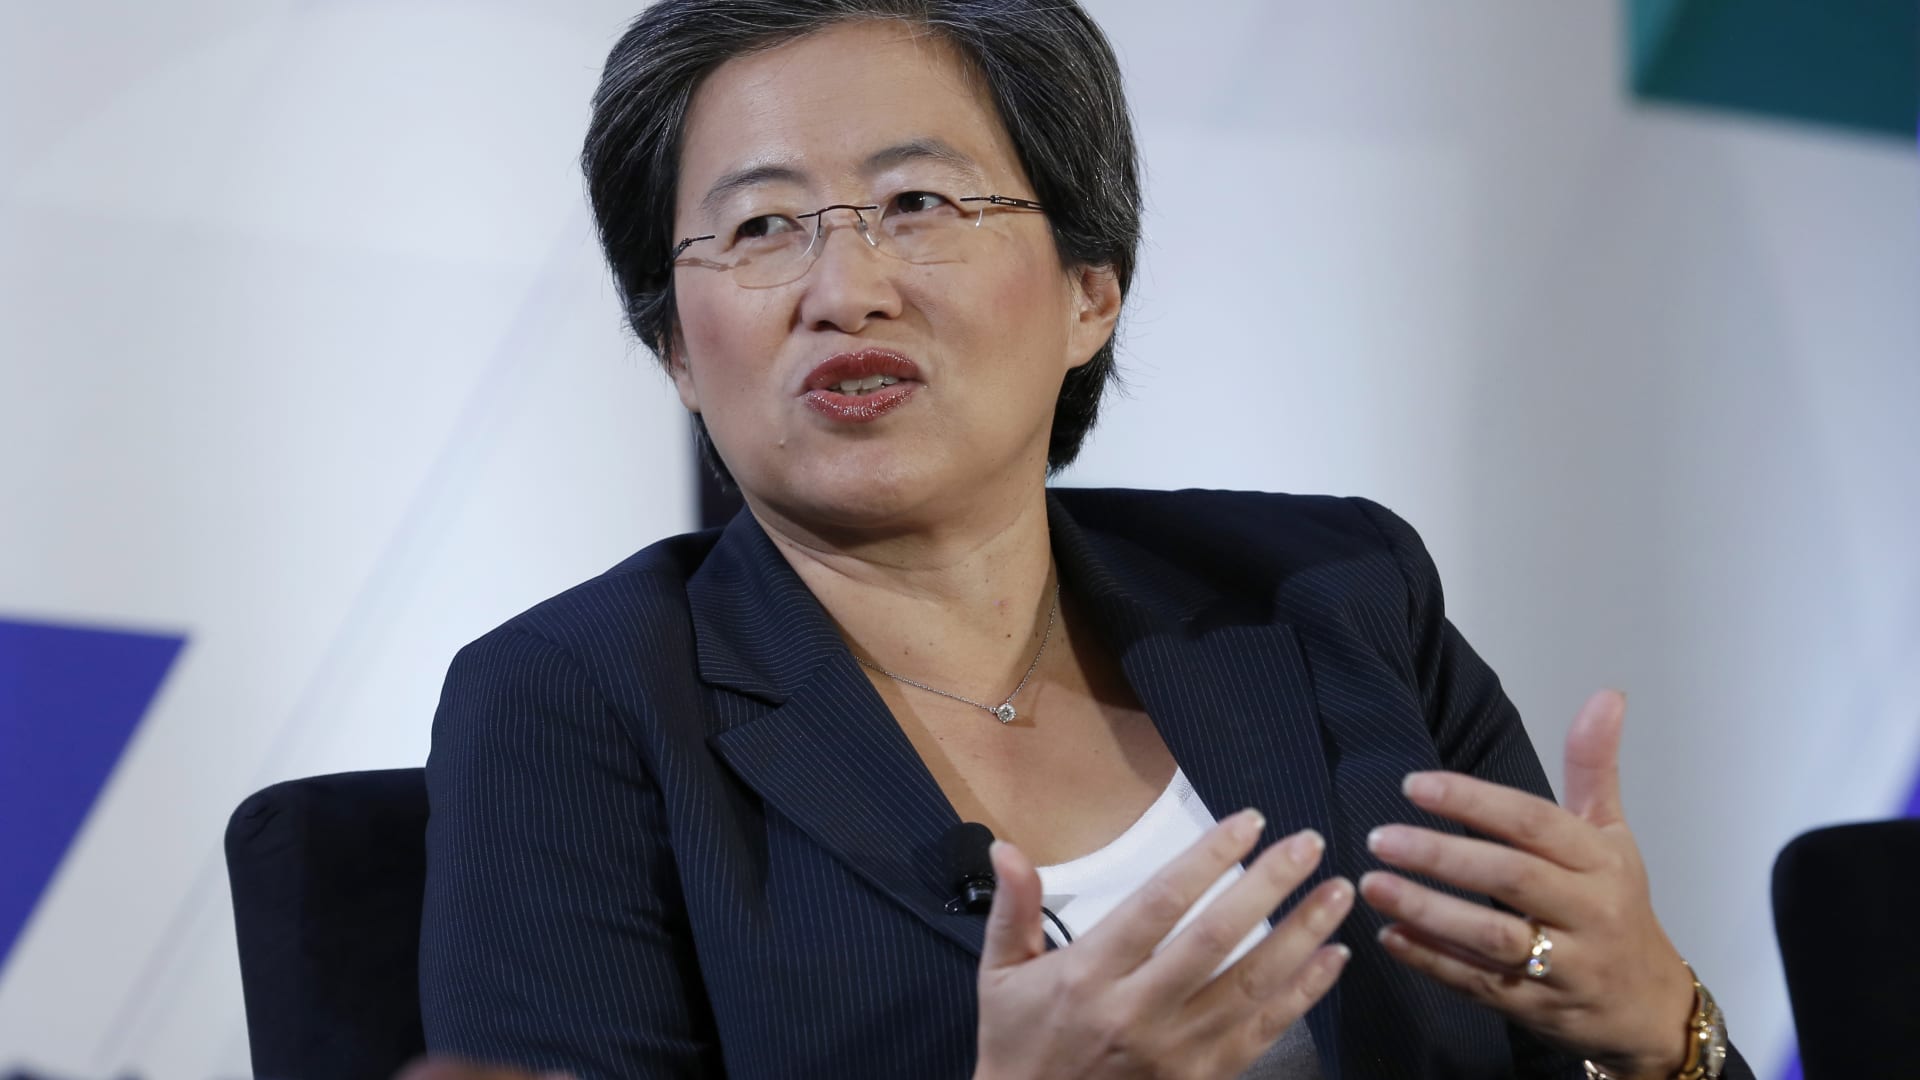 AMD's Big Bet to Go Beyond PC Chips Has "Got Very Well", Says CEO